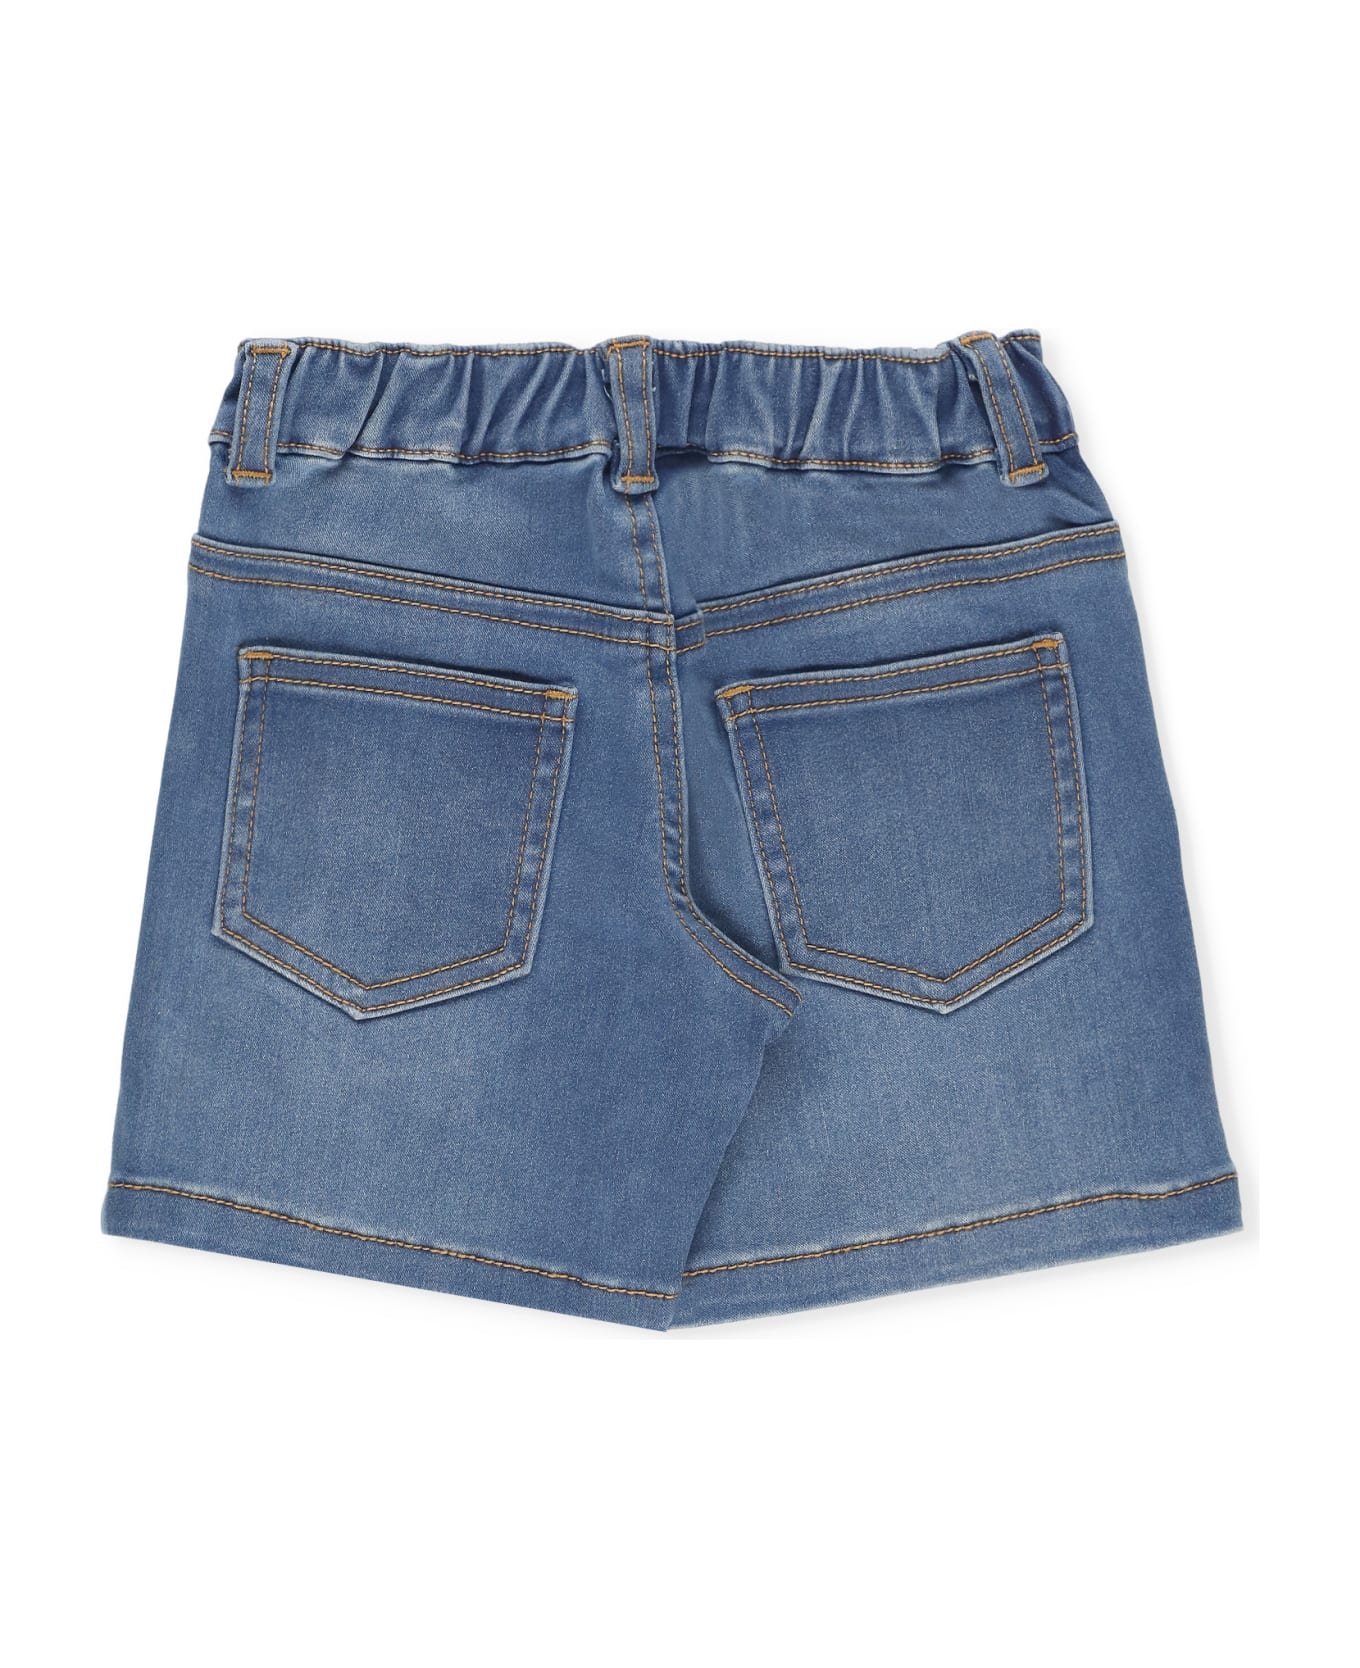 Moschino Shorts With Logo - Blue ボトムス